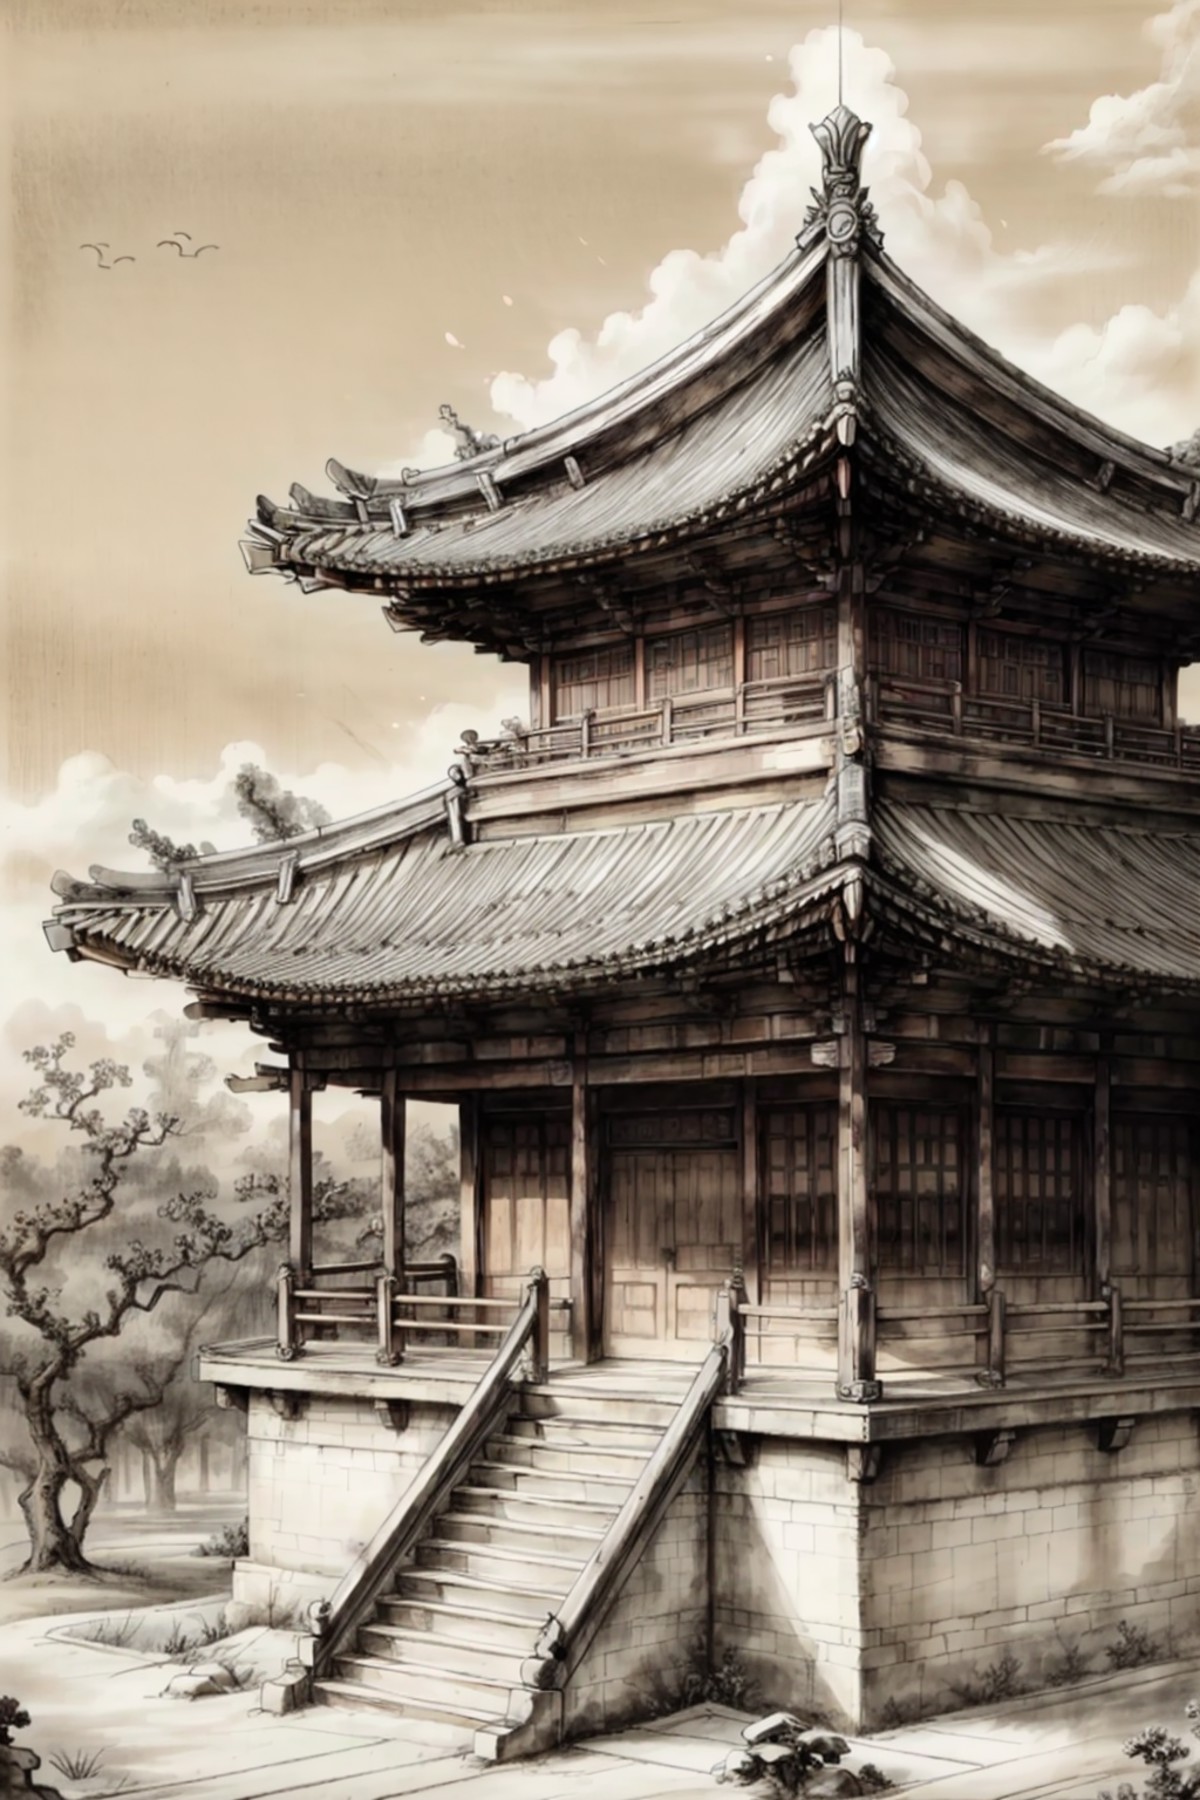 (masterpiece:0.9),best quality,
gongbiv,gongbi painting,architecture,east asian architecture,no humans,scenery,stairs,buil...